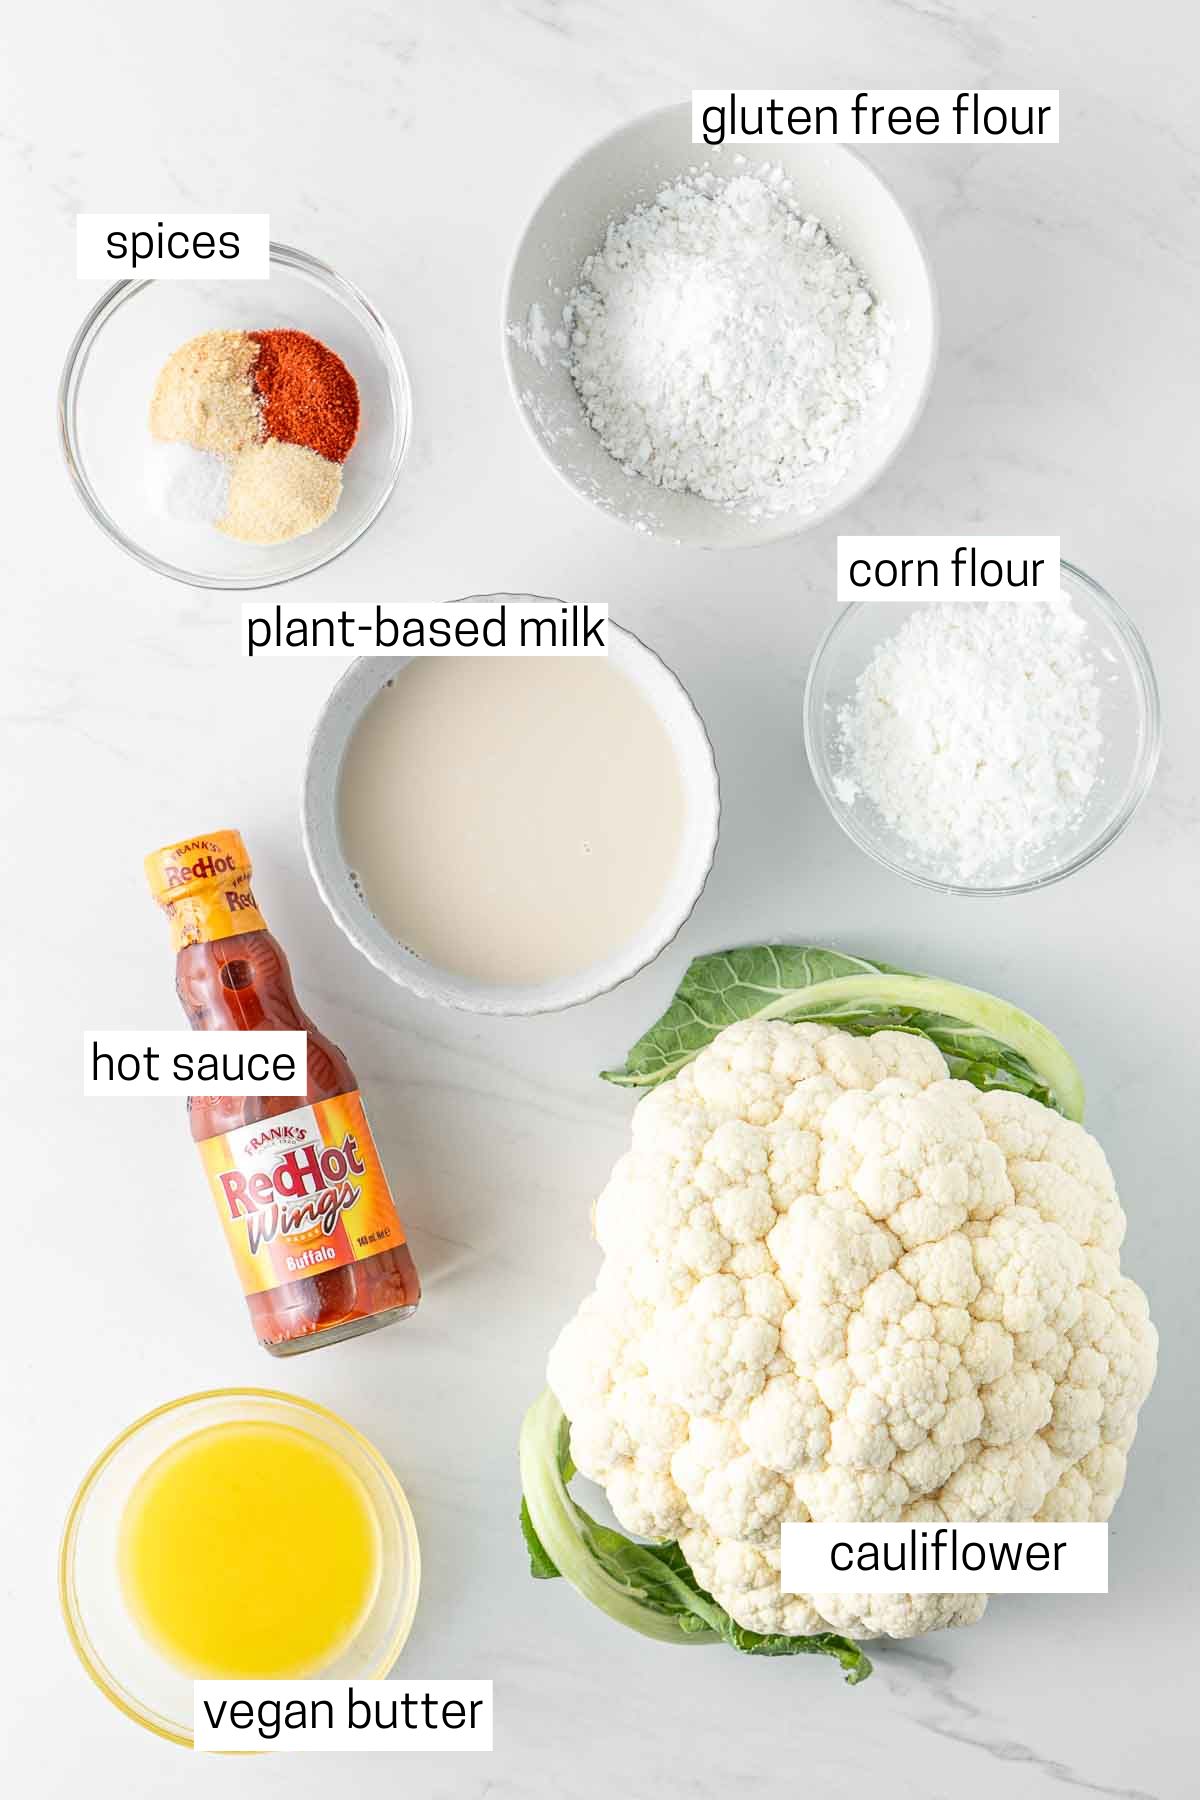 All ingredients needed for buffalo cauliflower laid out in small bowls.